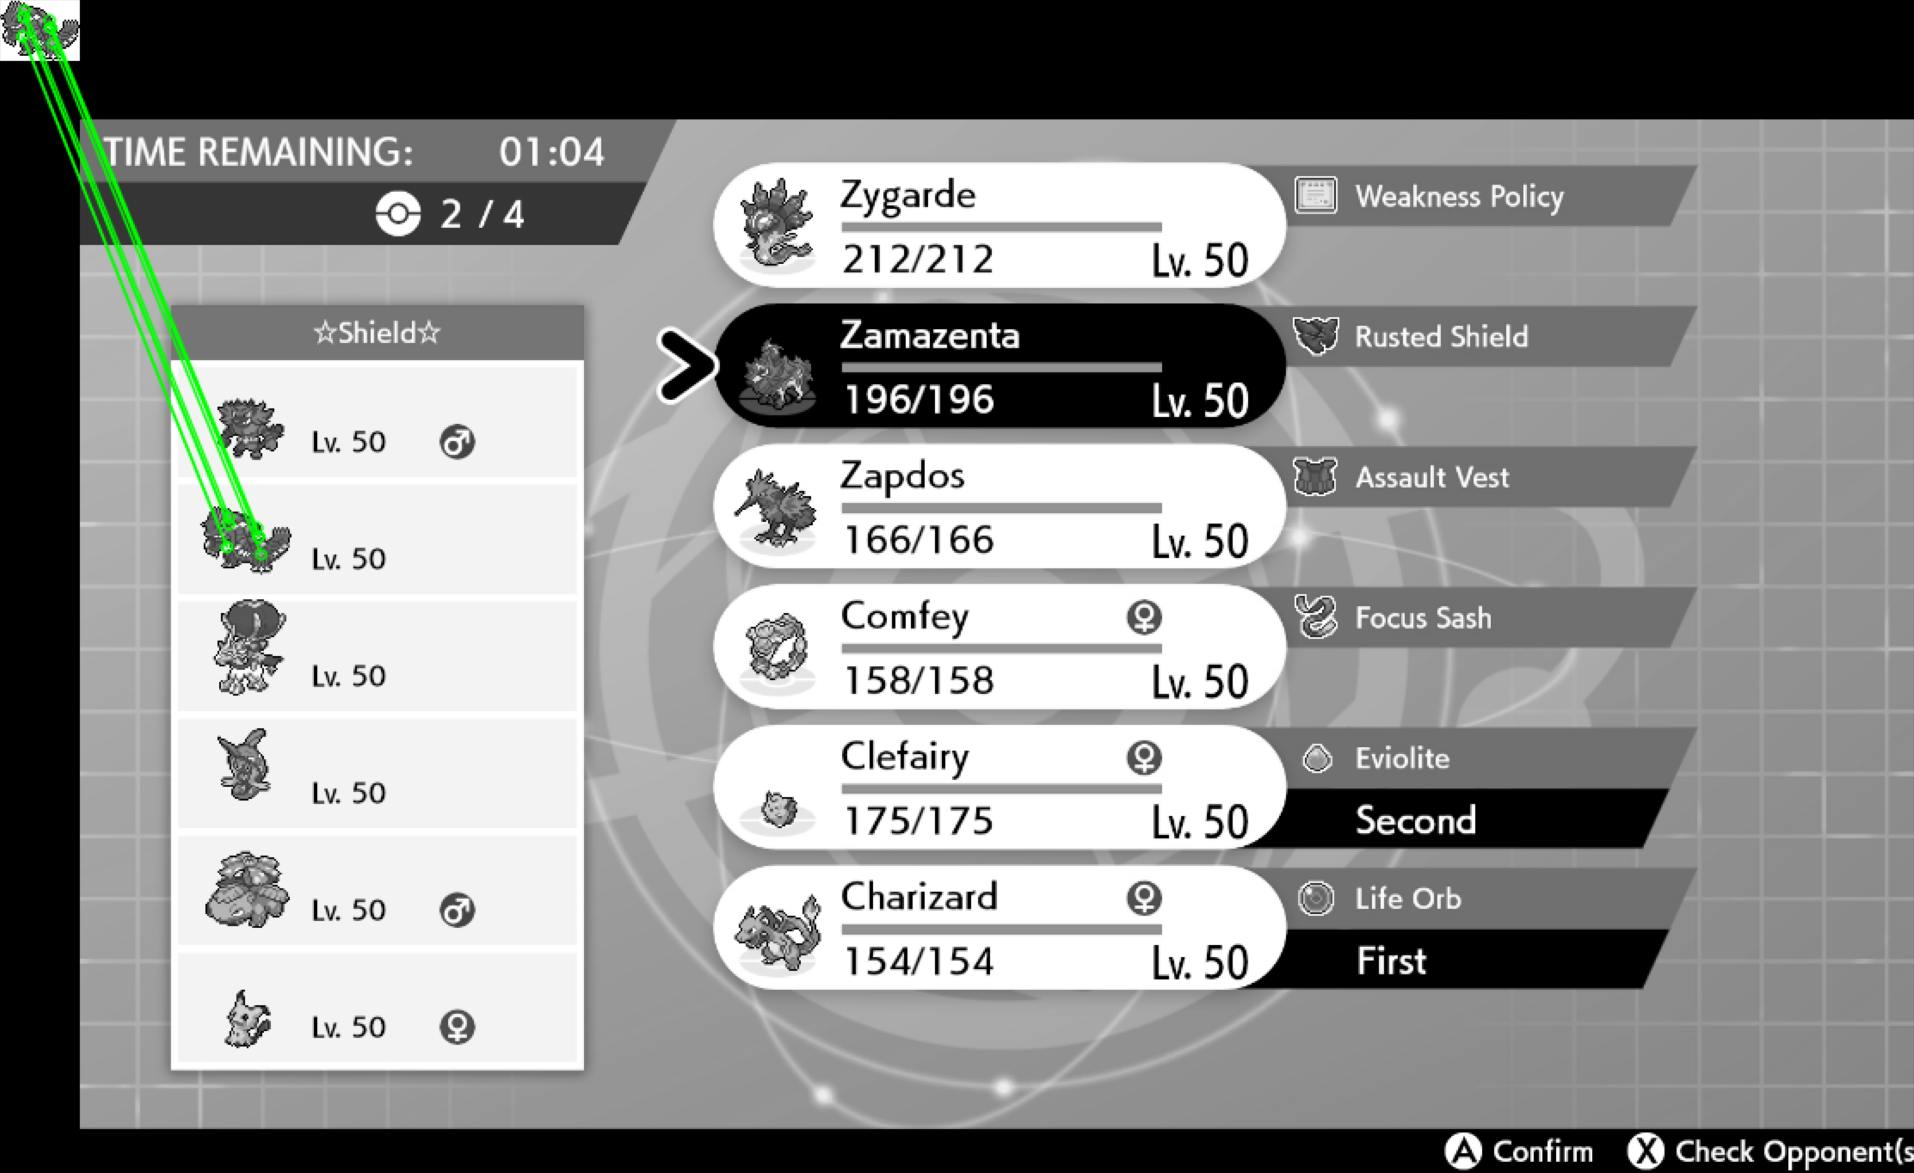 There are two black and white images side-by-side: a mini Groudon sprite and a screenshot of the team preview screen from Pokémon Shield. Five green lines are drawn from different points on the Groudon sprite image to the matching locations on a Groudon sprite that is on the opponent's team in the screenshot.